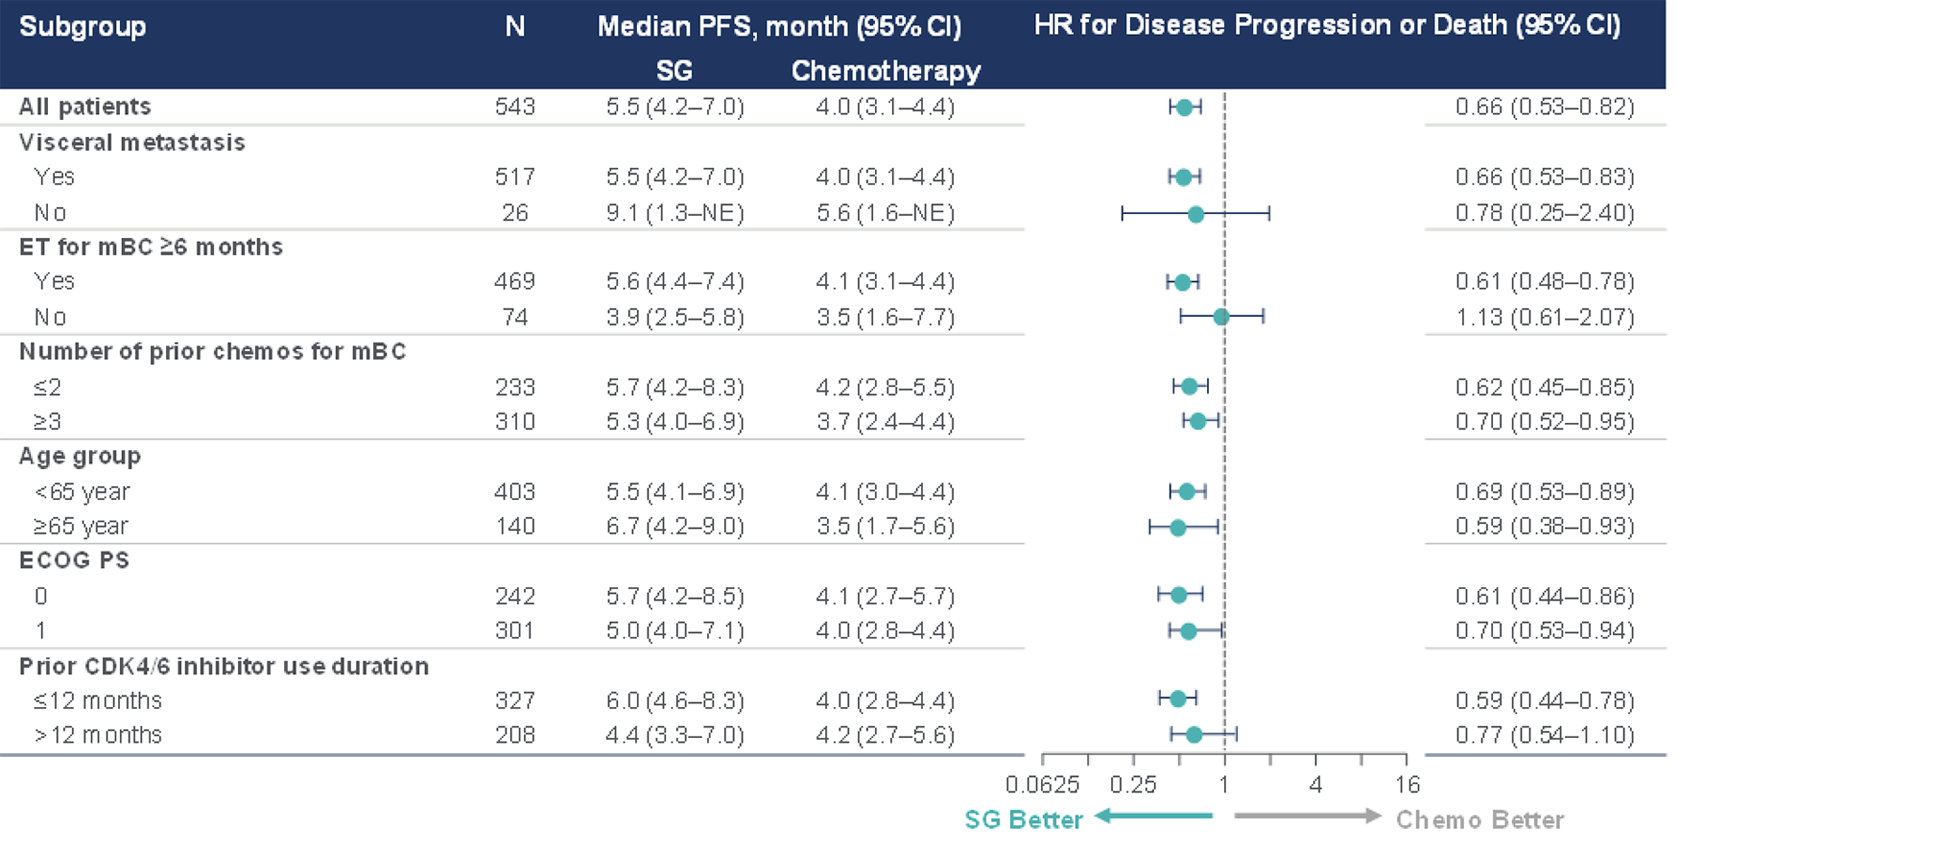 The figure describes the median PFS in months (95% CI) in sacituzumab govitecan (SG) and treatment of physician's choice (TPC) groups and results of HRs (95% CI) for subgroups of visceral metastasis (yes or no), endocrine therapy (ET) for mBC for at least 6 months (yes or no), number of prior chemotherapies for mBC (at most 2 or at least 3), age group (under 65 years or at least 65 years), ECOG PS (0 or 1), and prior CDK4/6 inhibitor duration (at most 12 months or longer than 12 months).